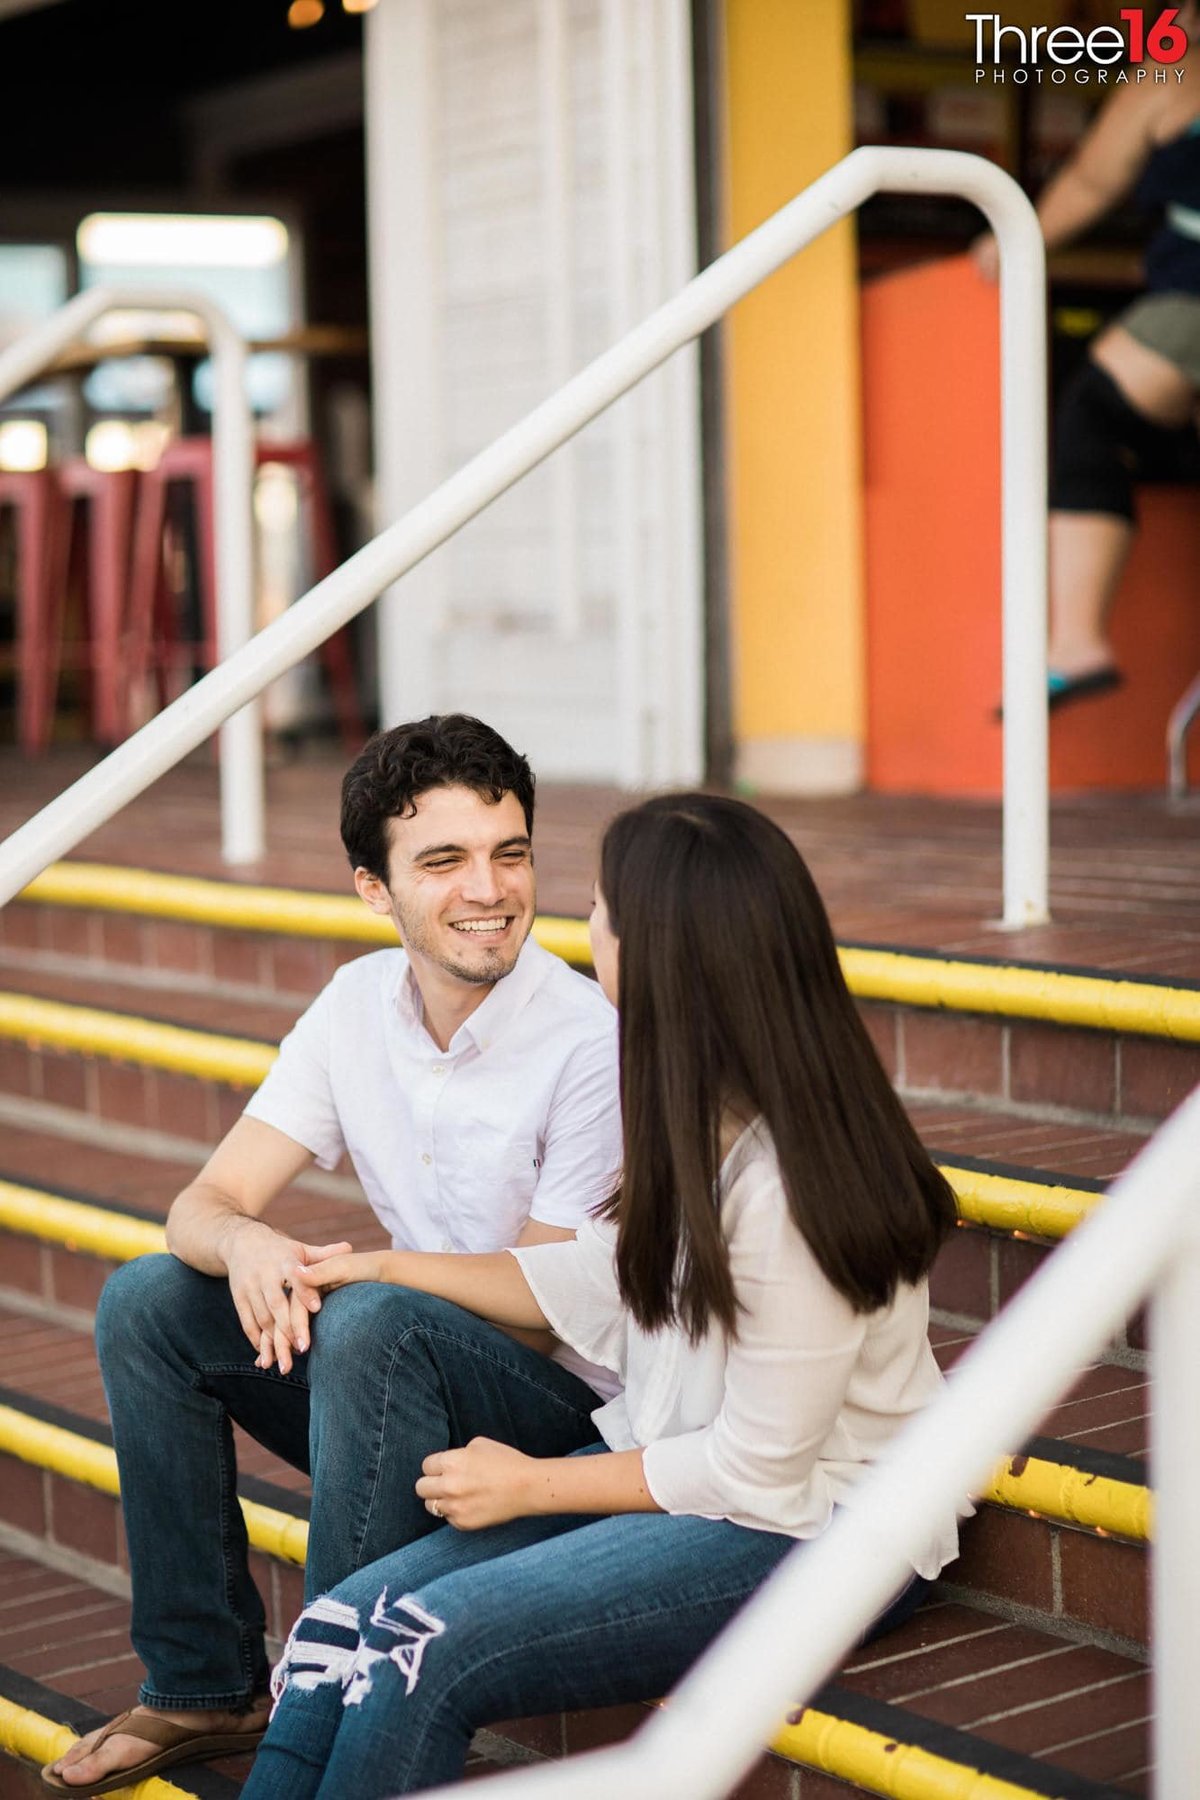 Couple smiling at each other while sitting on arcade steps